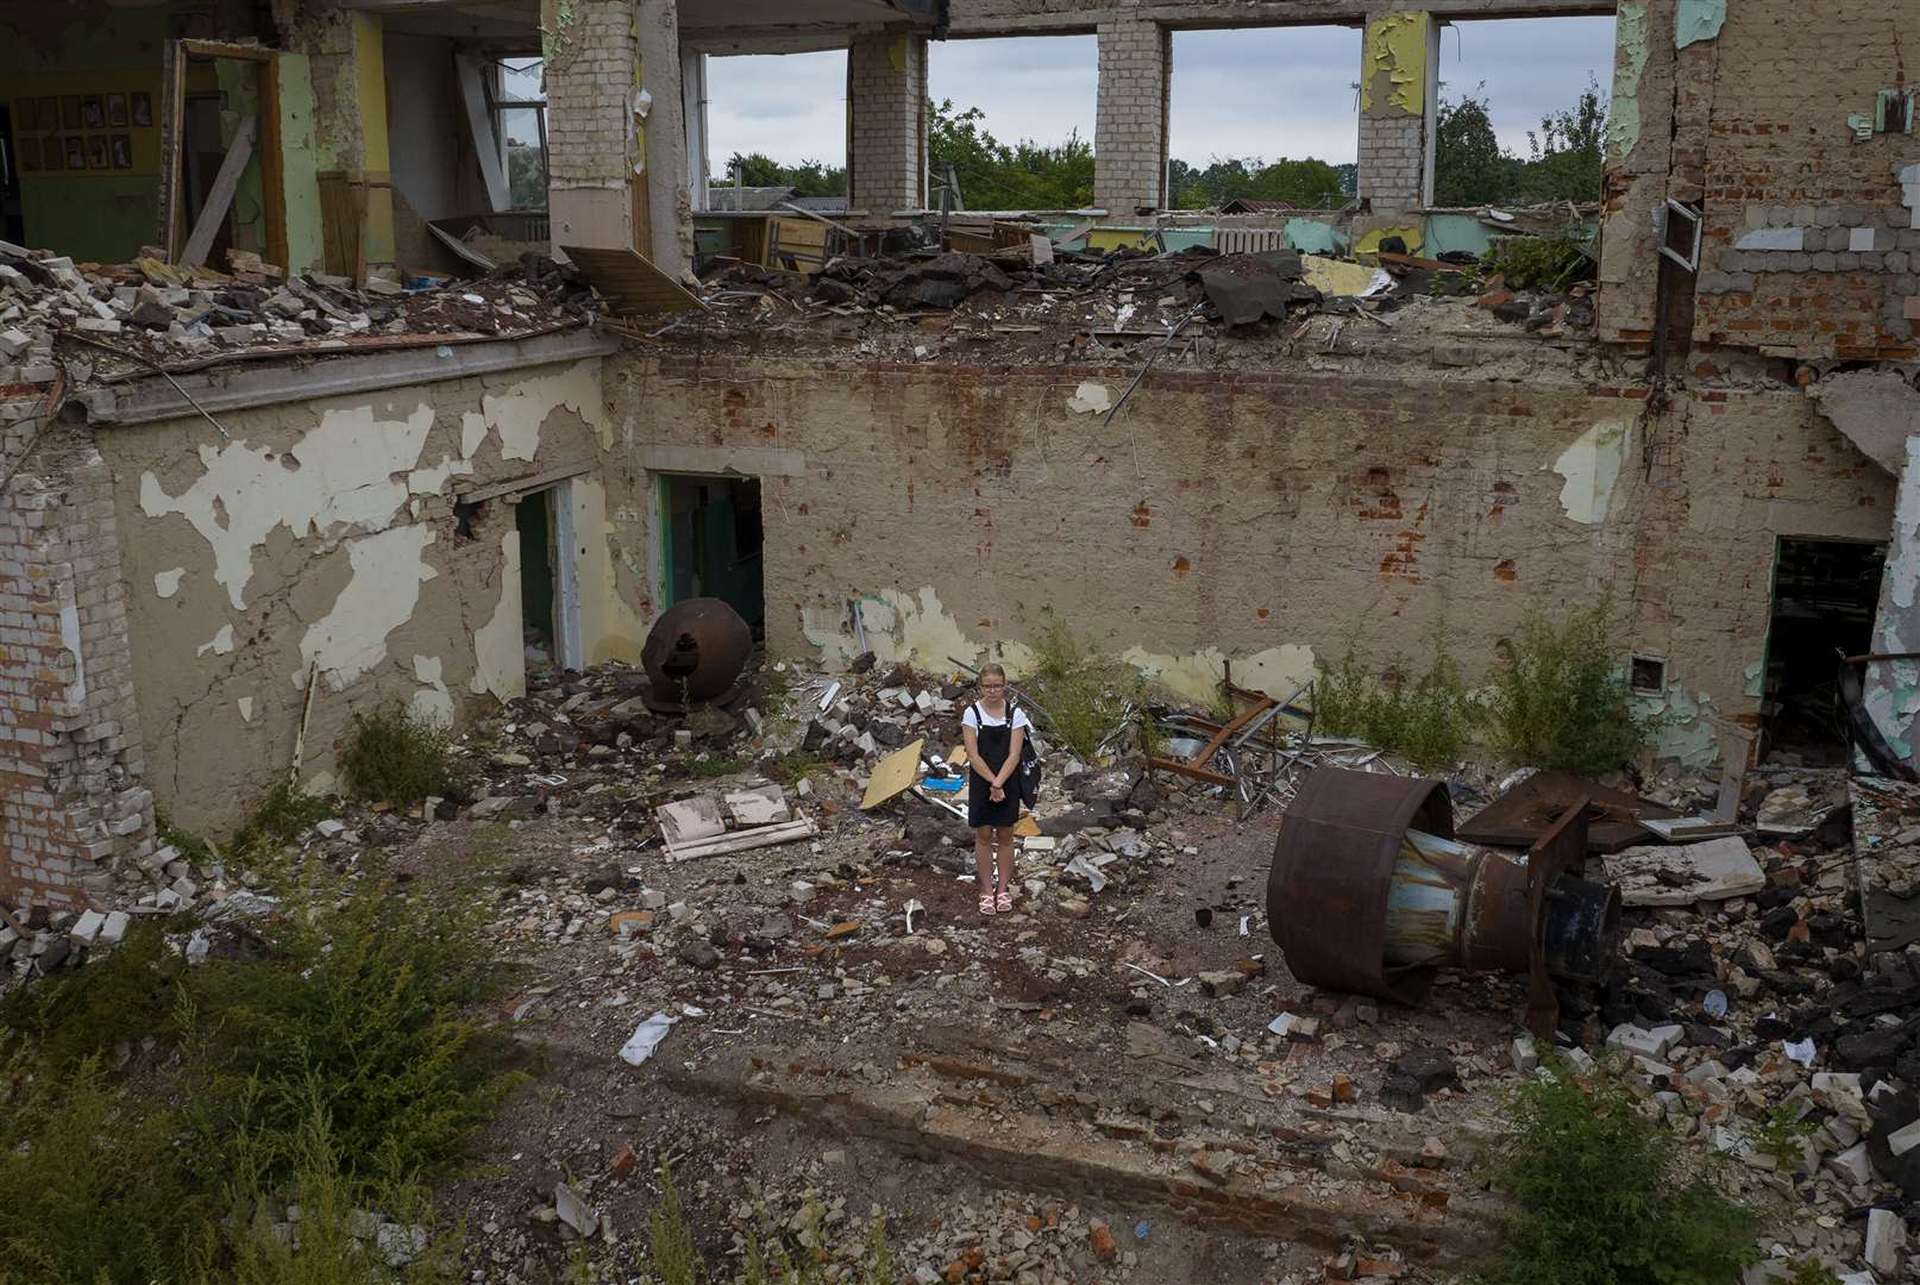 Anastasia Avramenko stands in the rubble of her former classroom, in the same position where her desk sat before the Chernihiv School #21